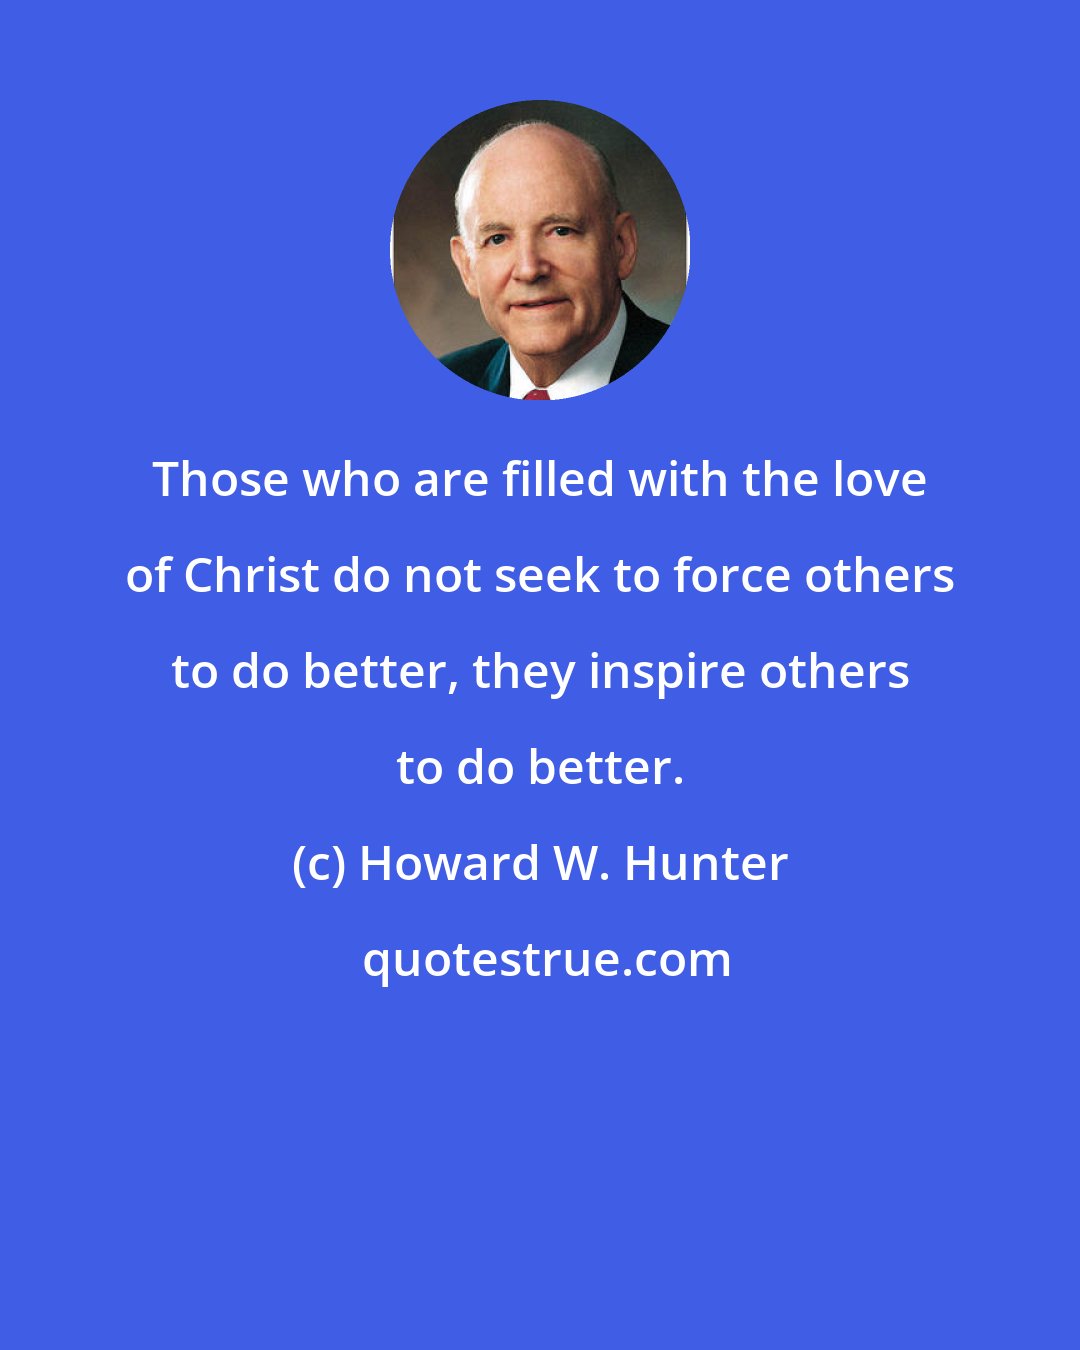 Howard W. Hunter: Those who are filled with the love of Christ do not seek to force others to do better, they inspire others to do better.